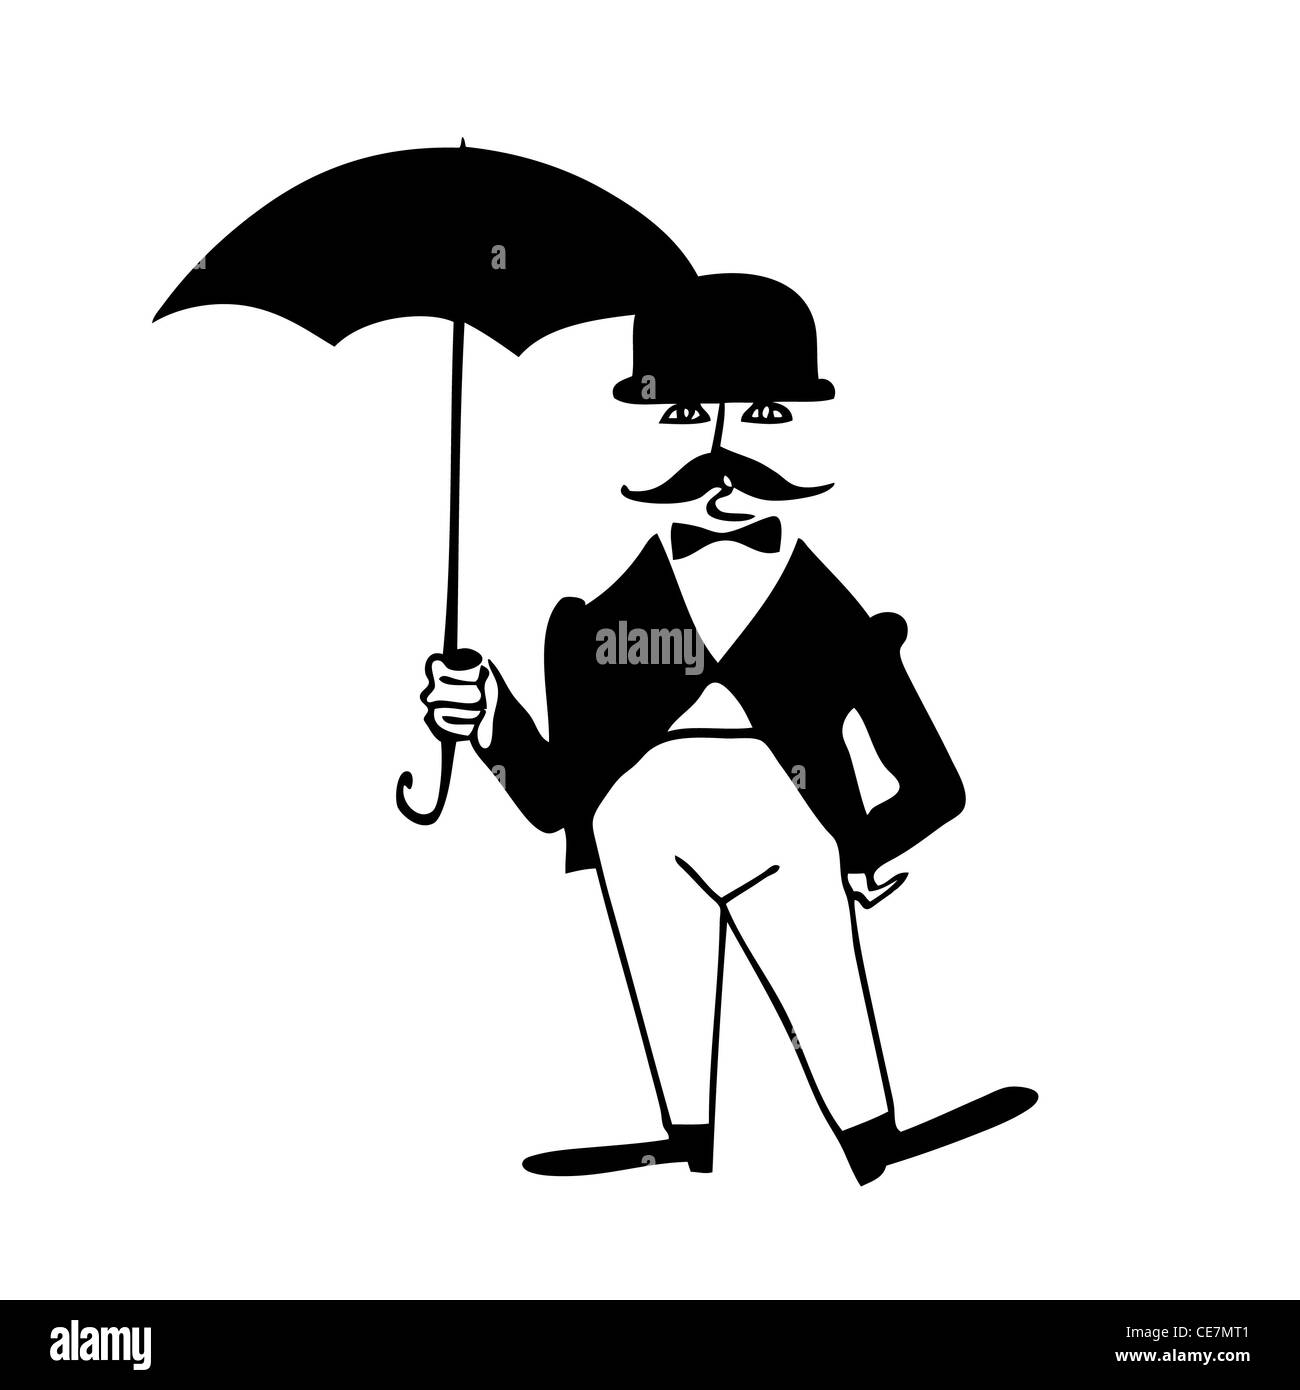 vector silhouette of the gentleman with umbrella on white background Stock Photo